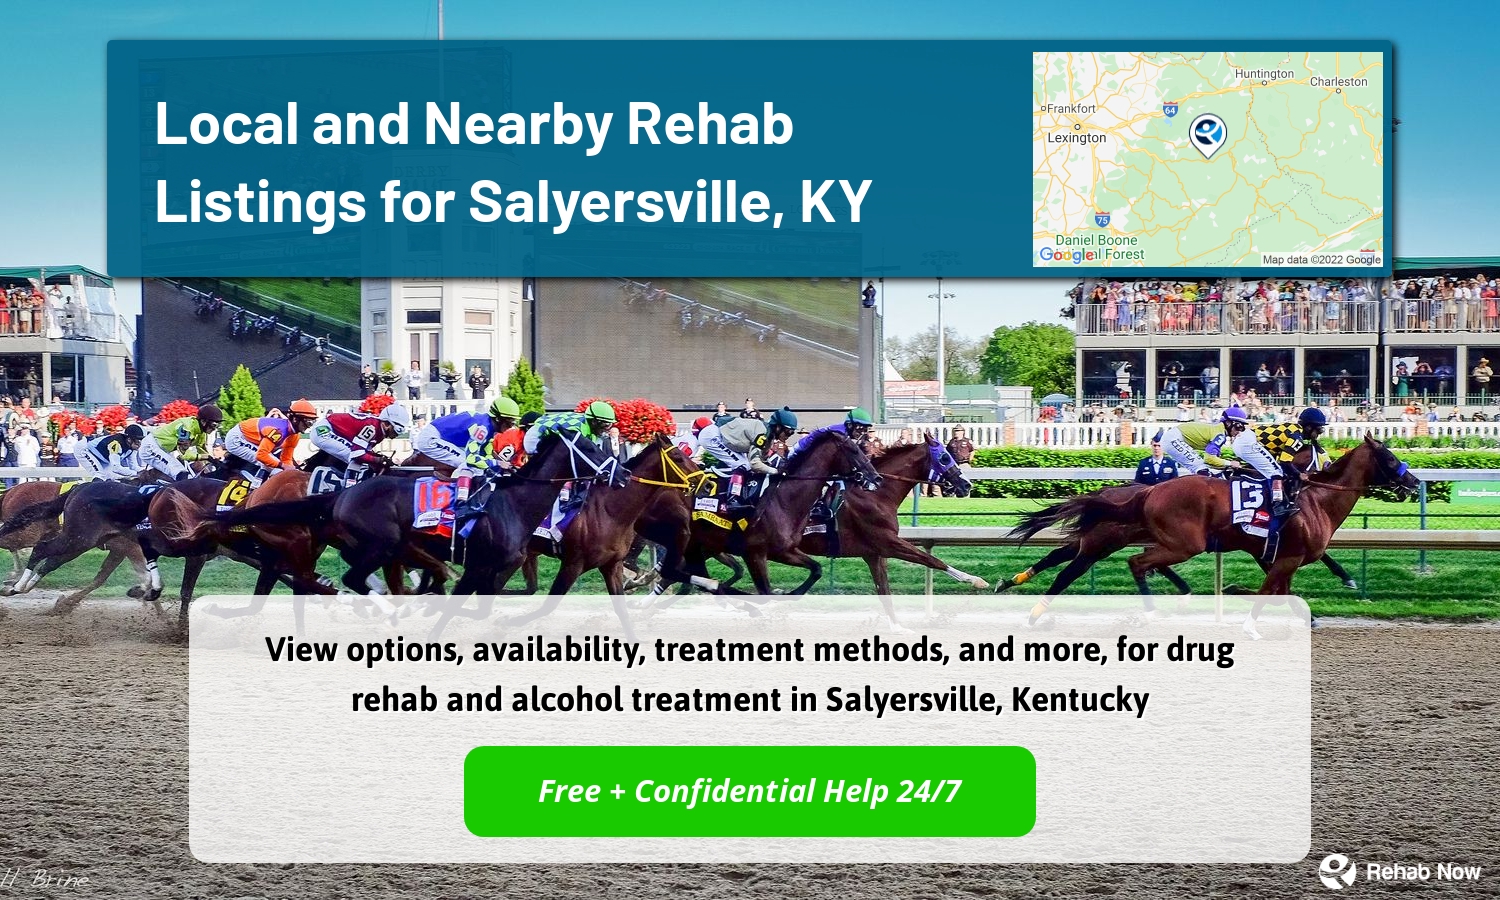 View options, availability, treatment methods, and more, for drug rehab and alcohol treatment in Salyersville, Kentucky